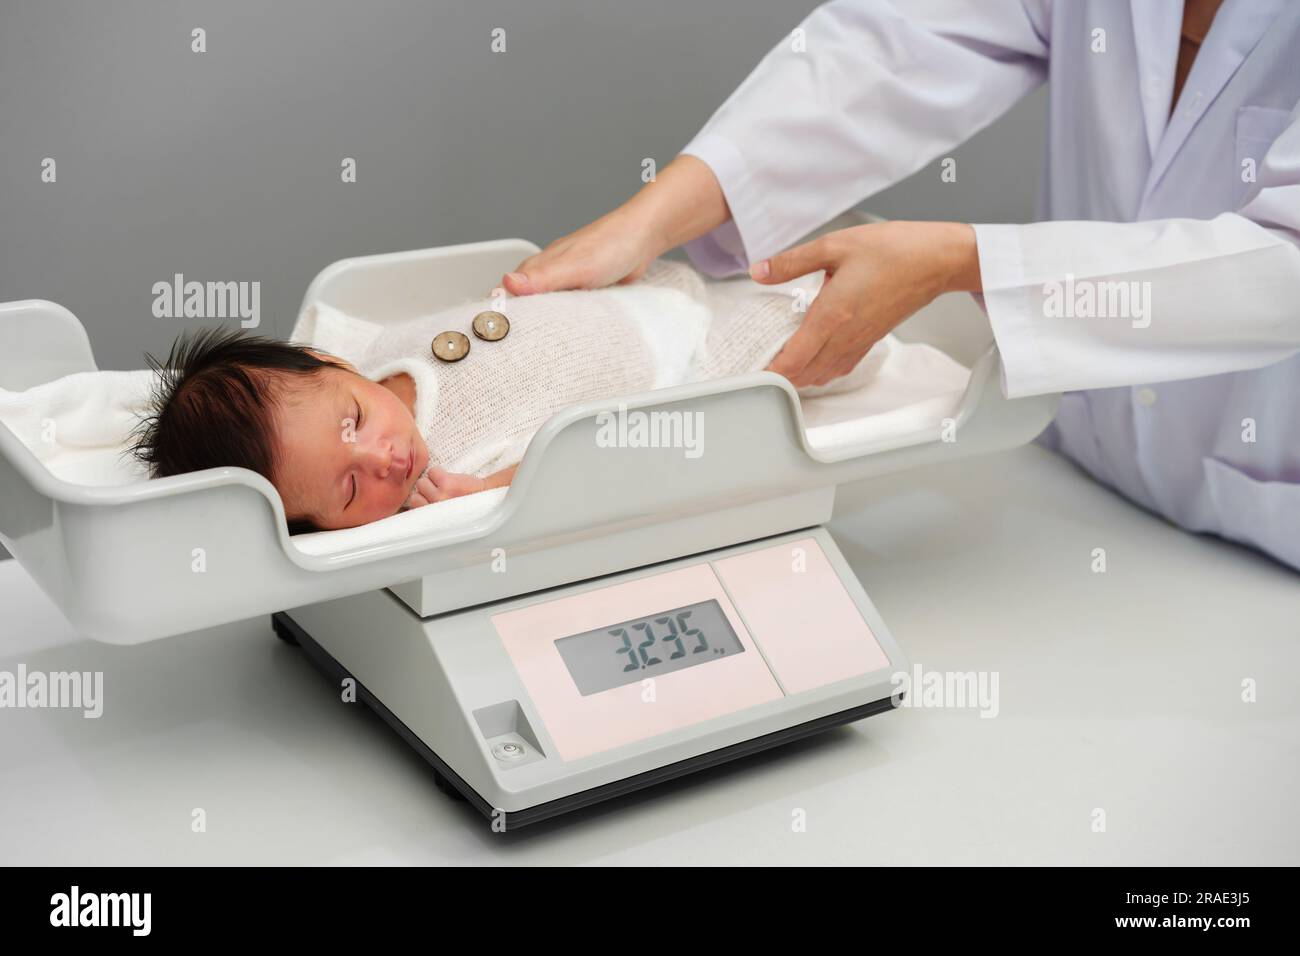 Measuring & Scales - Baby Weighing Scales